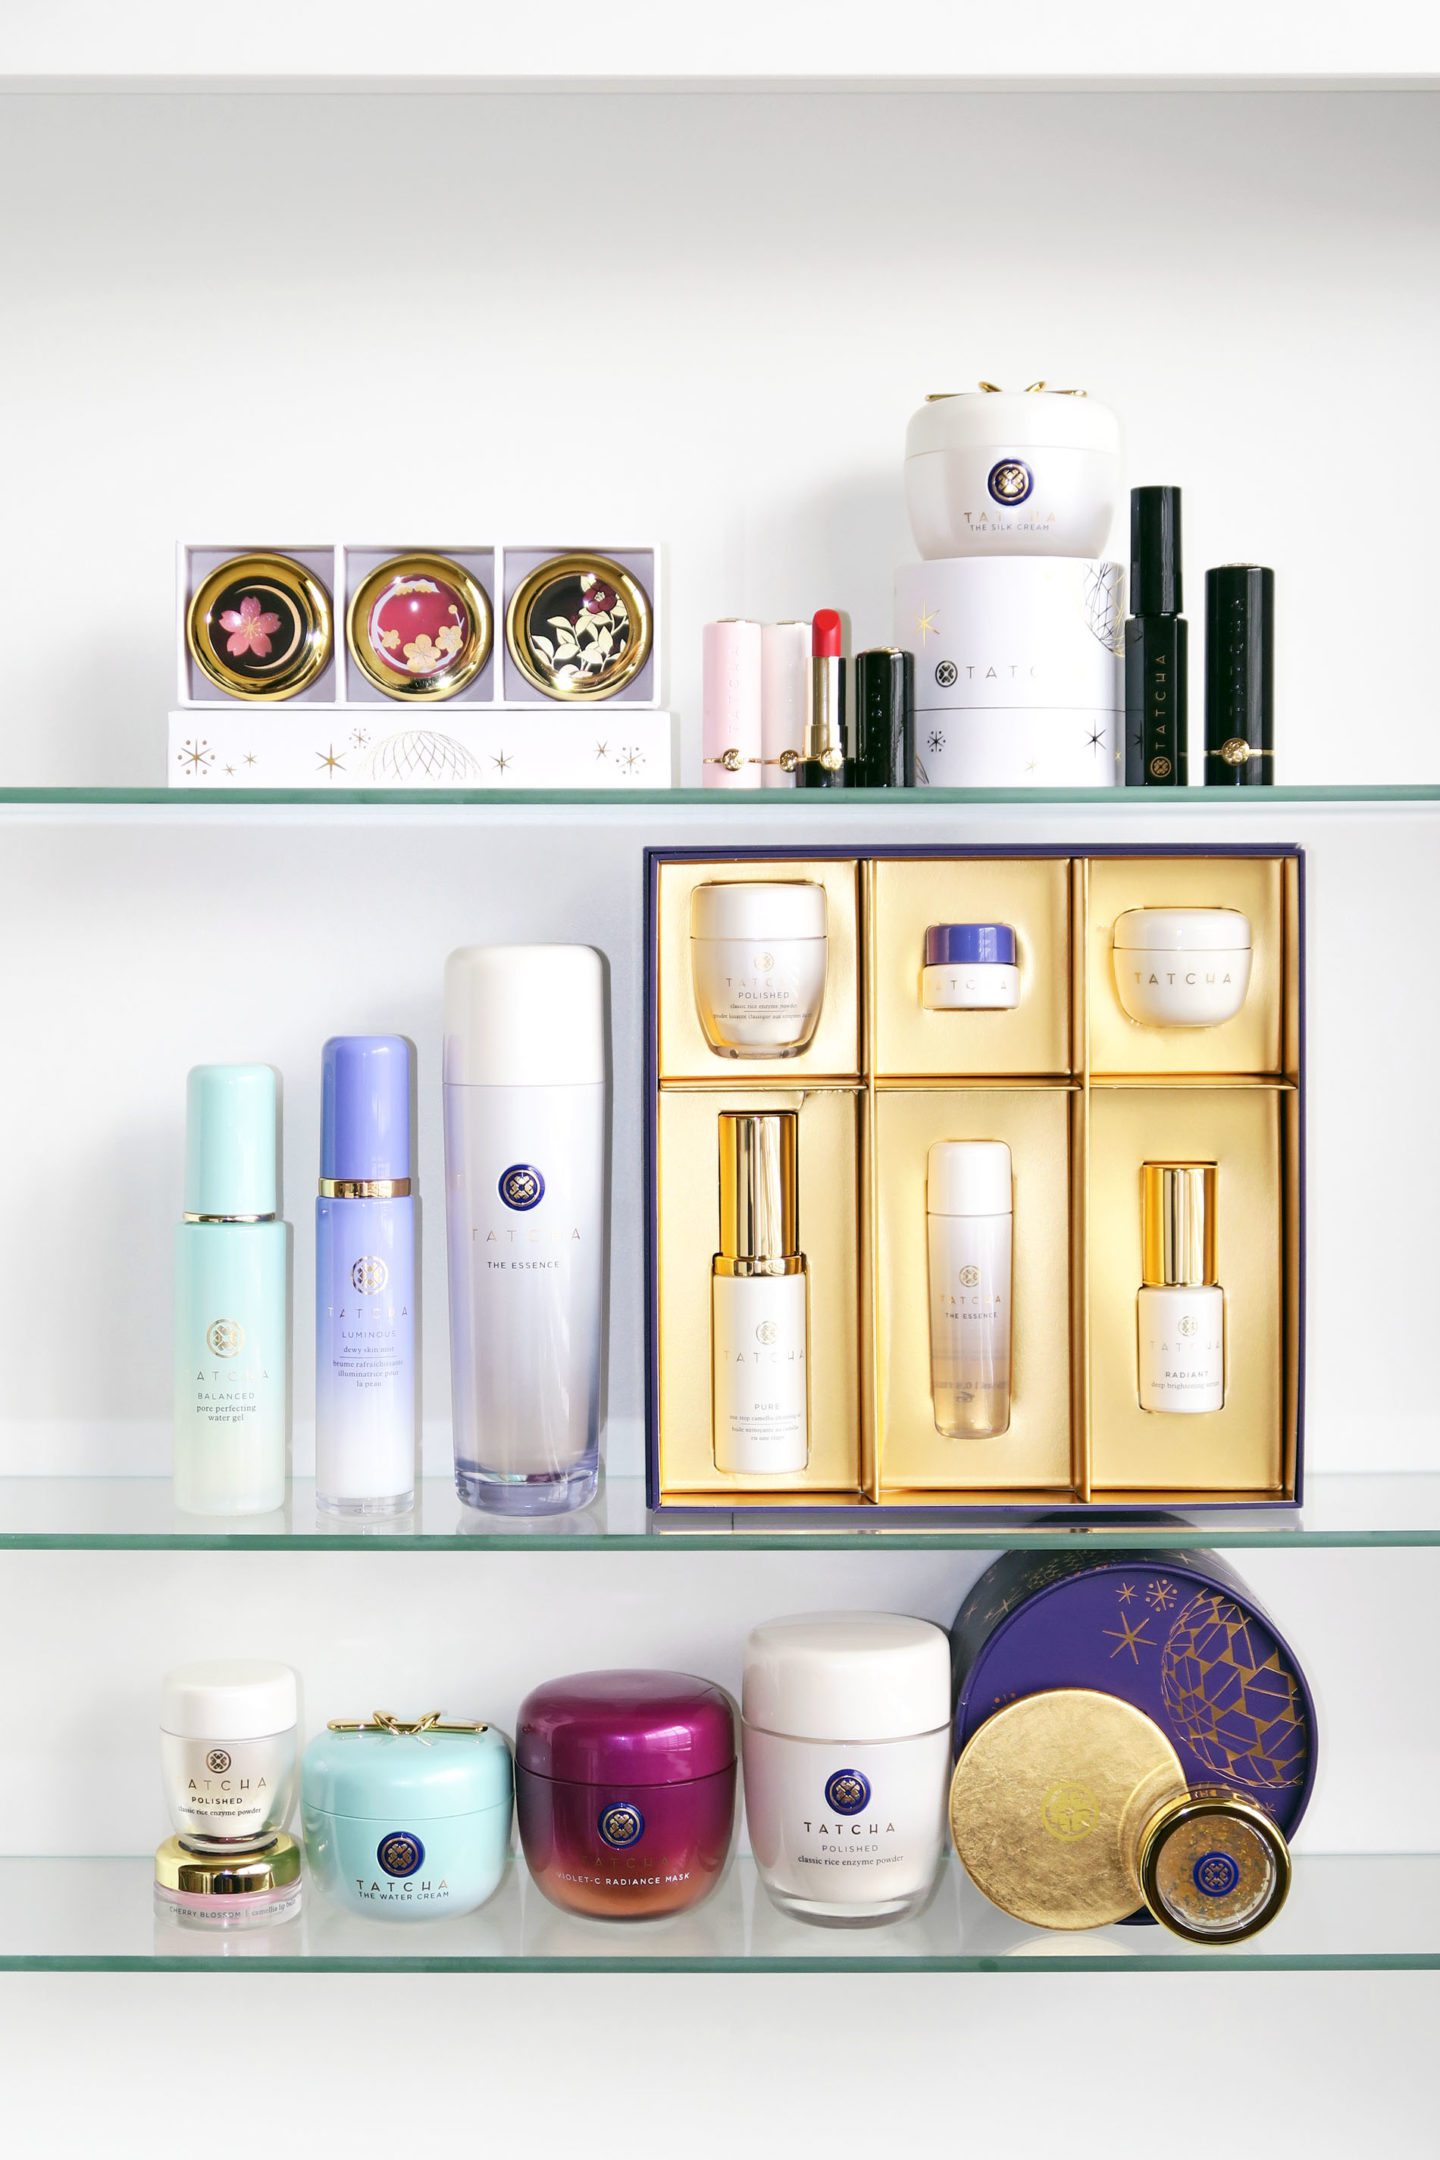 Tatcha Holiday Gift Sets and Favorite Skincare | The Beauty Look Book